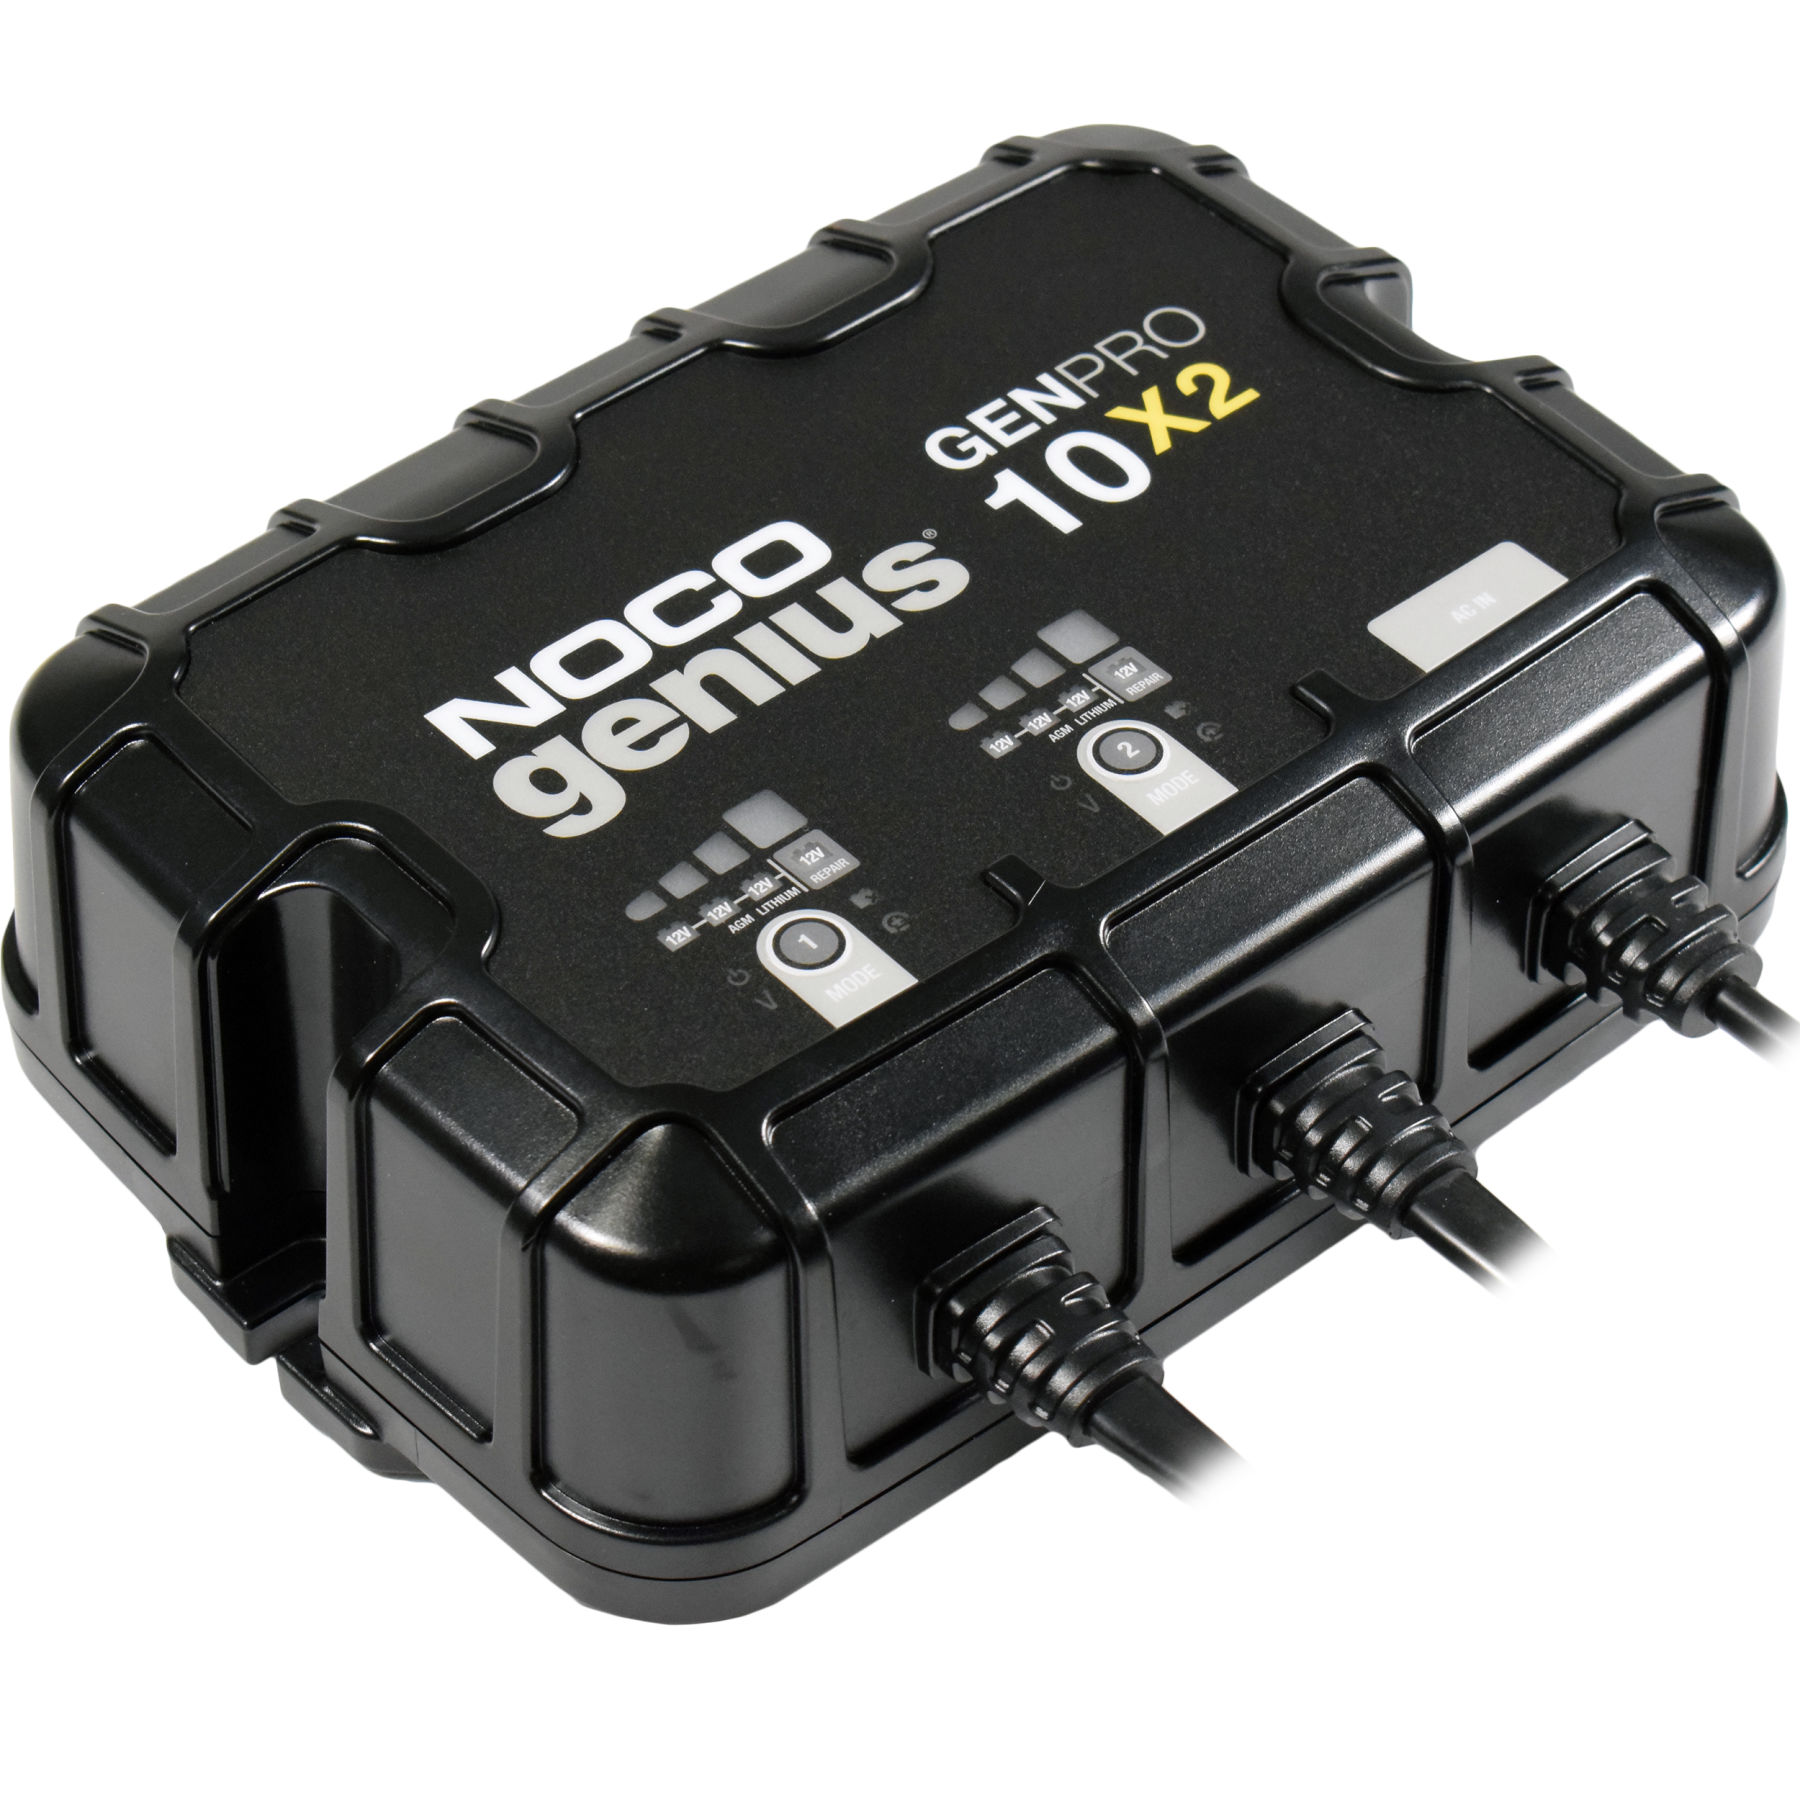 NOCO - GENPRO10X2 - 2-Bank 20A Onboard Battery Charger